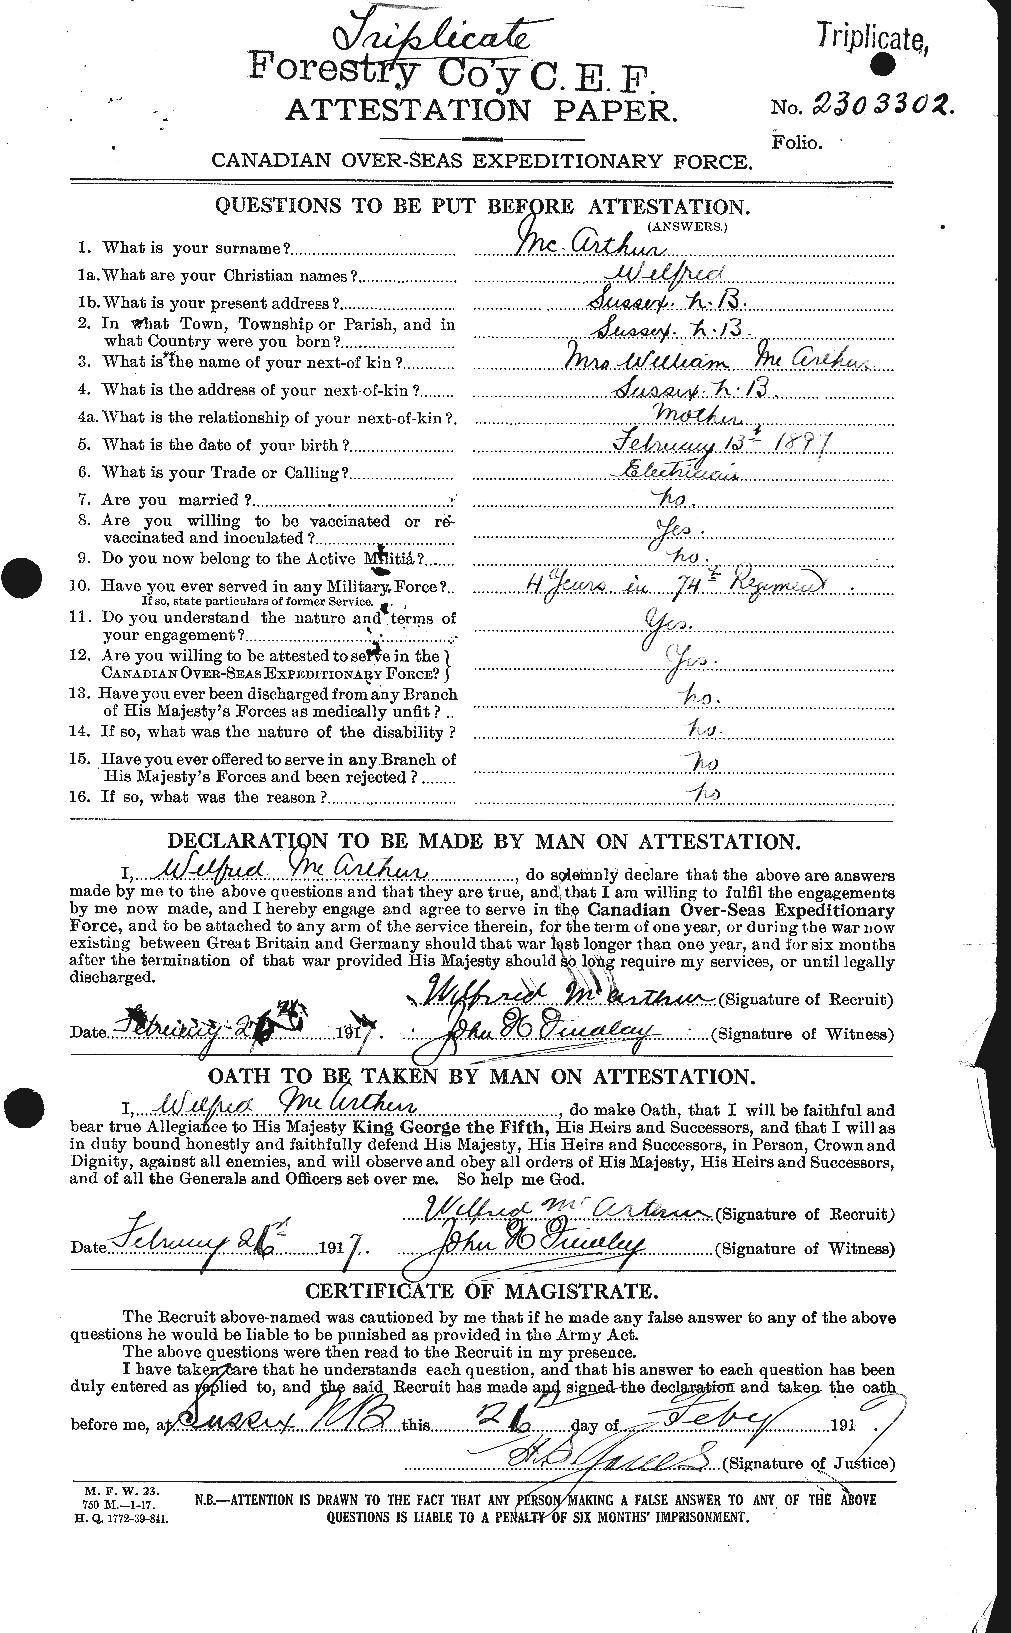 Personnel Records of the First World War - CEF 130627a